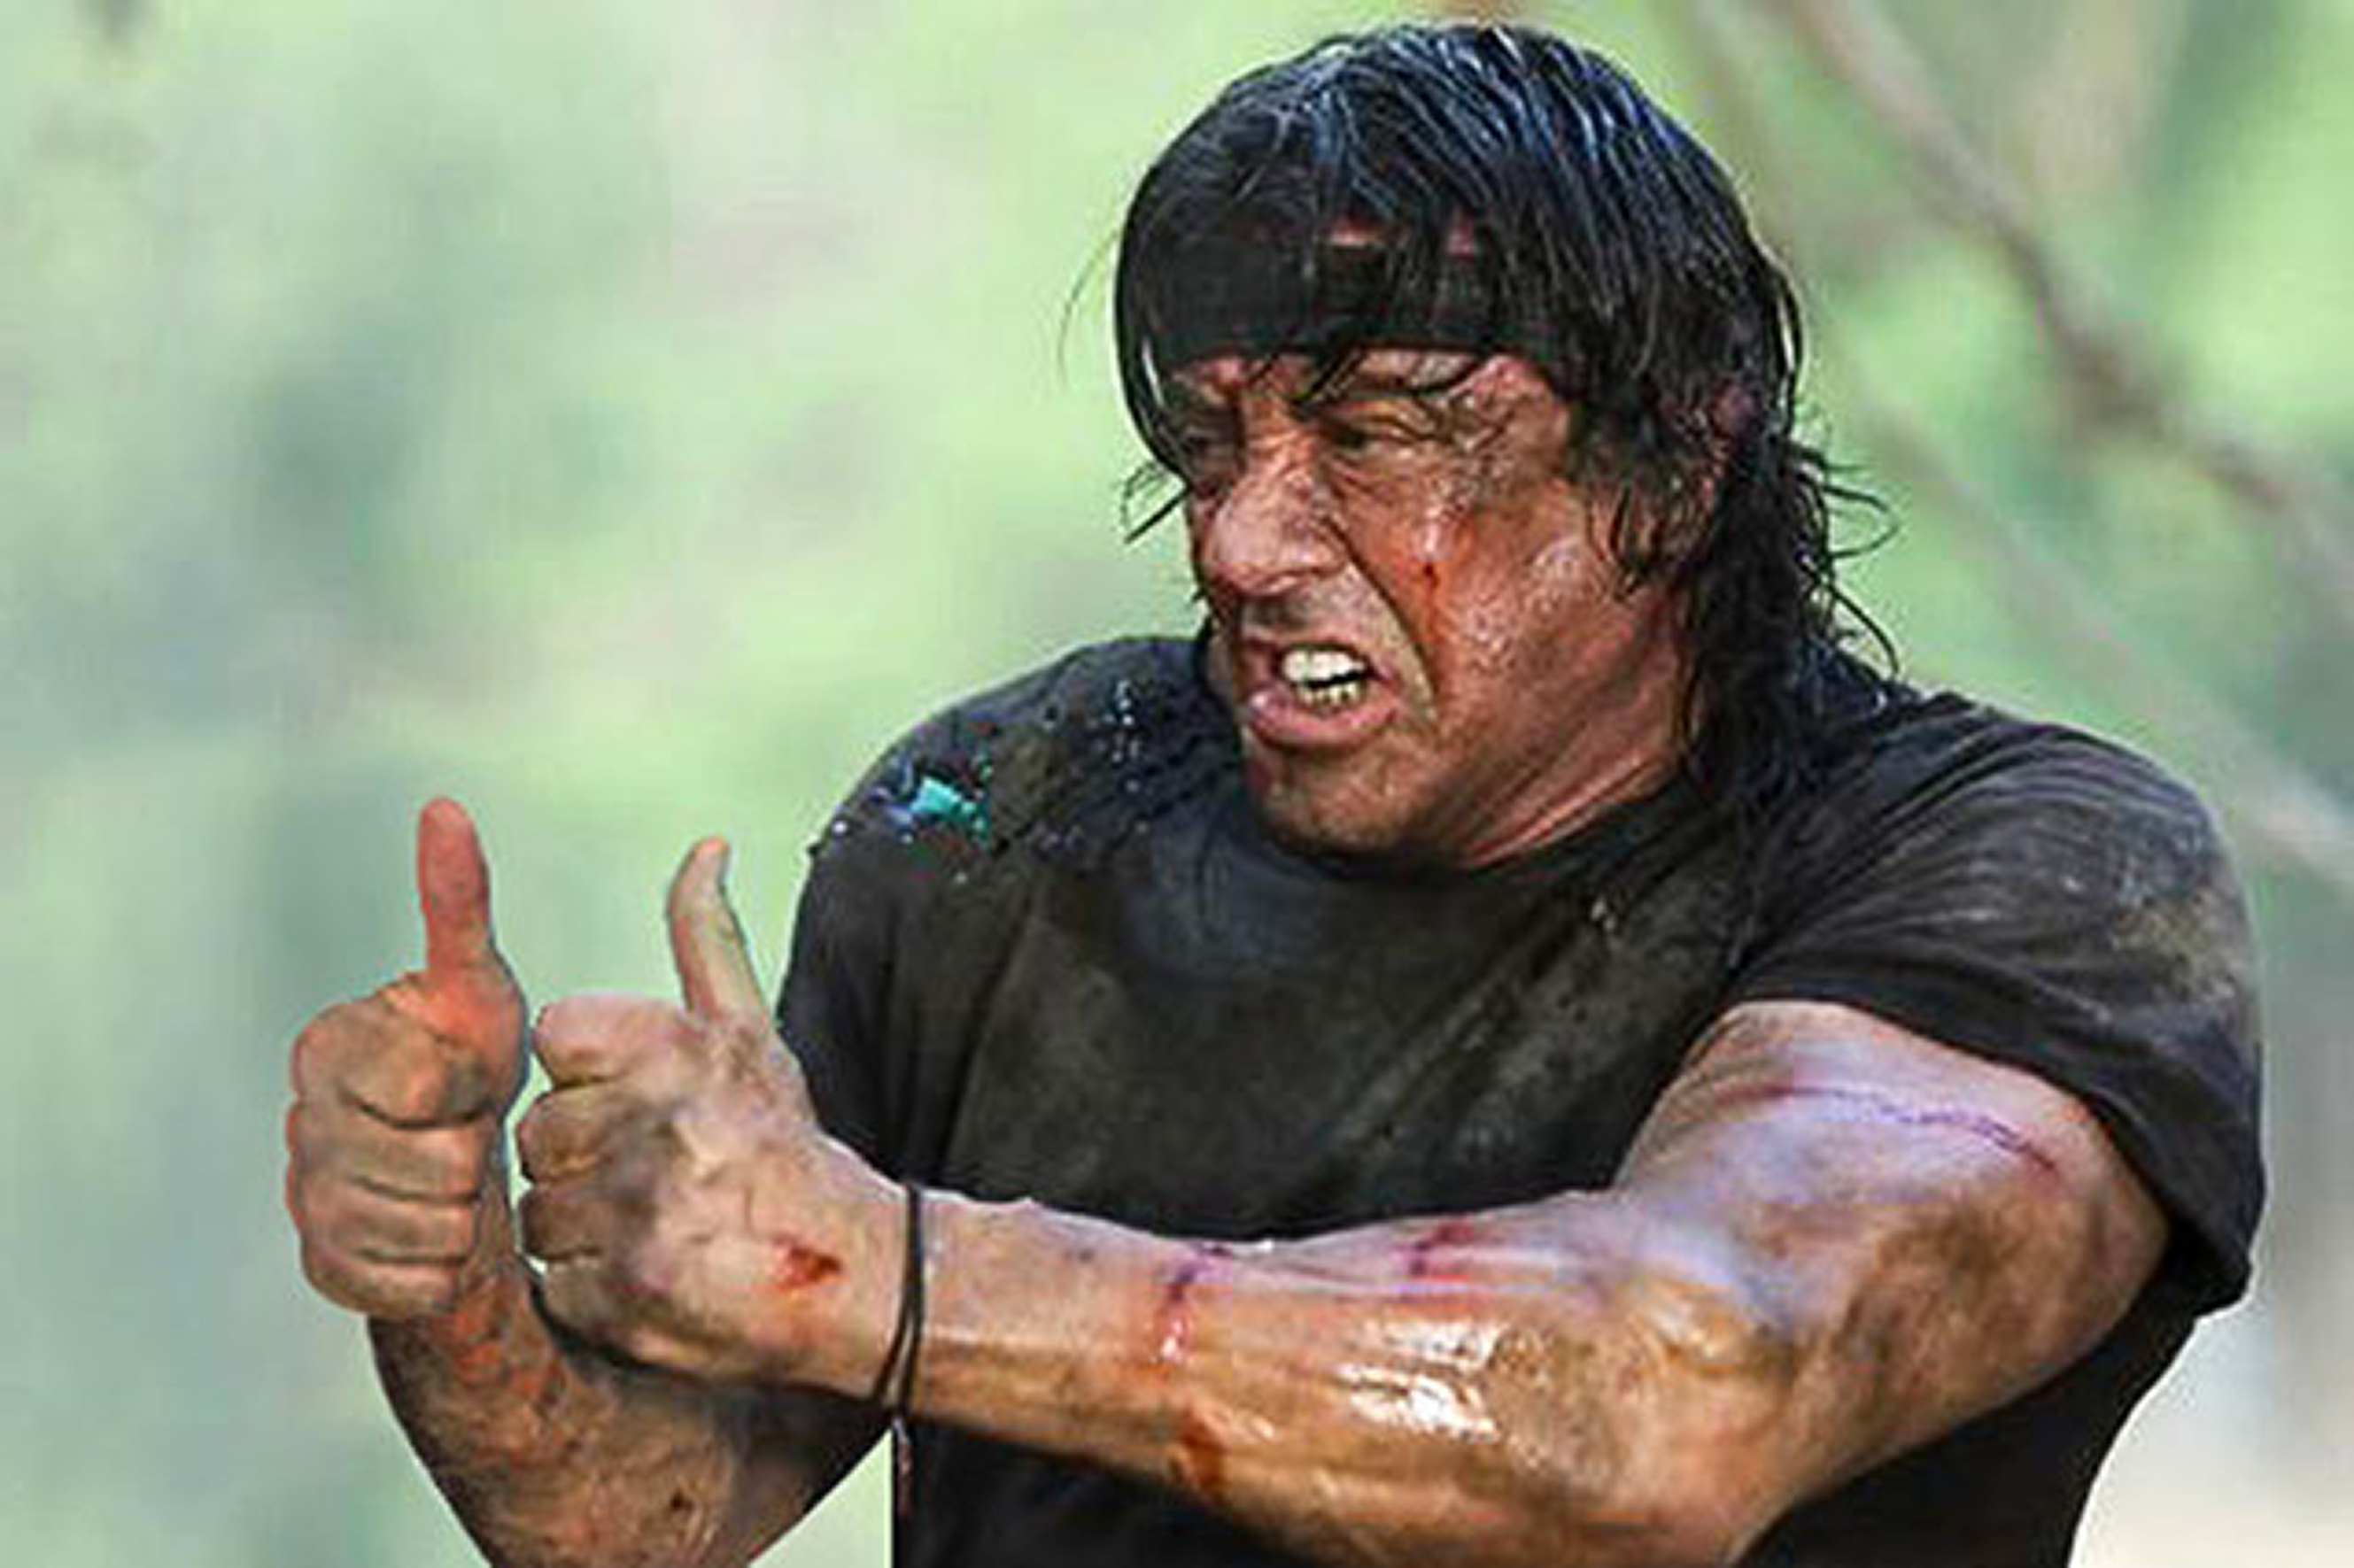 Rambo Backgrounds, Compatible - PC, Mobile, Gadgets| 2658x1771 px